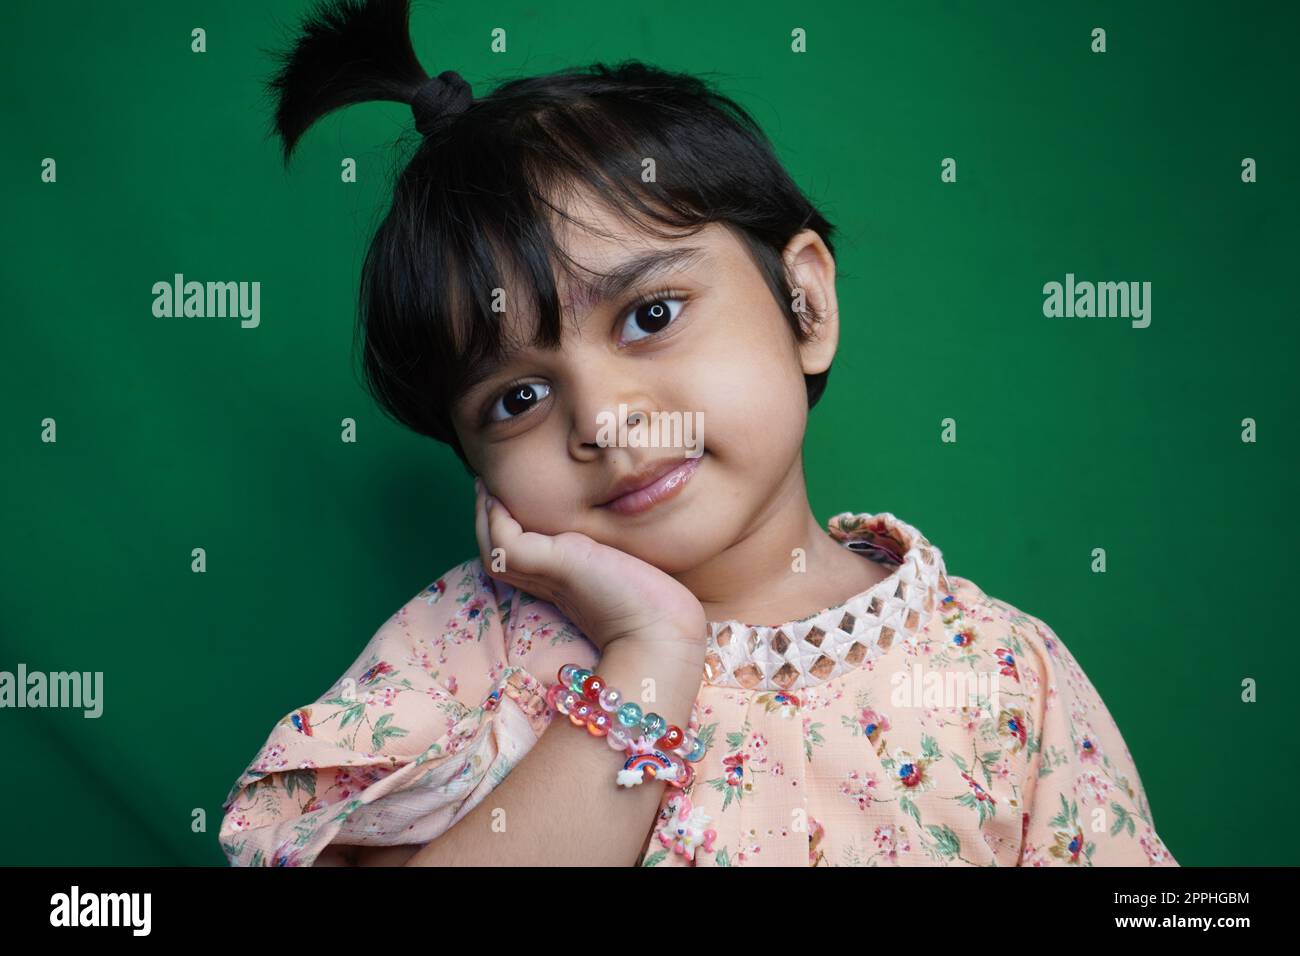 Portrait of Innocent little cute girl giving her best studio shoots on green screen background photo stock image in HD Stock Photo